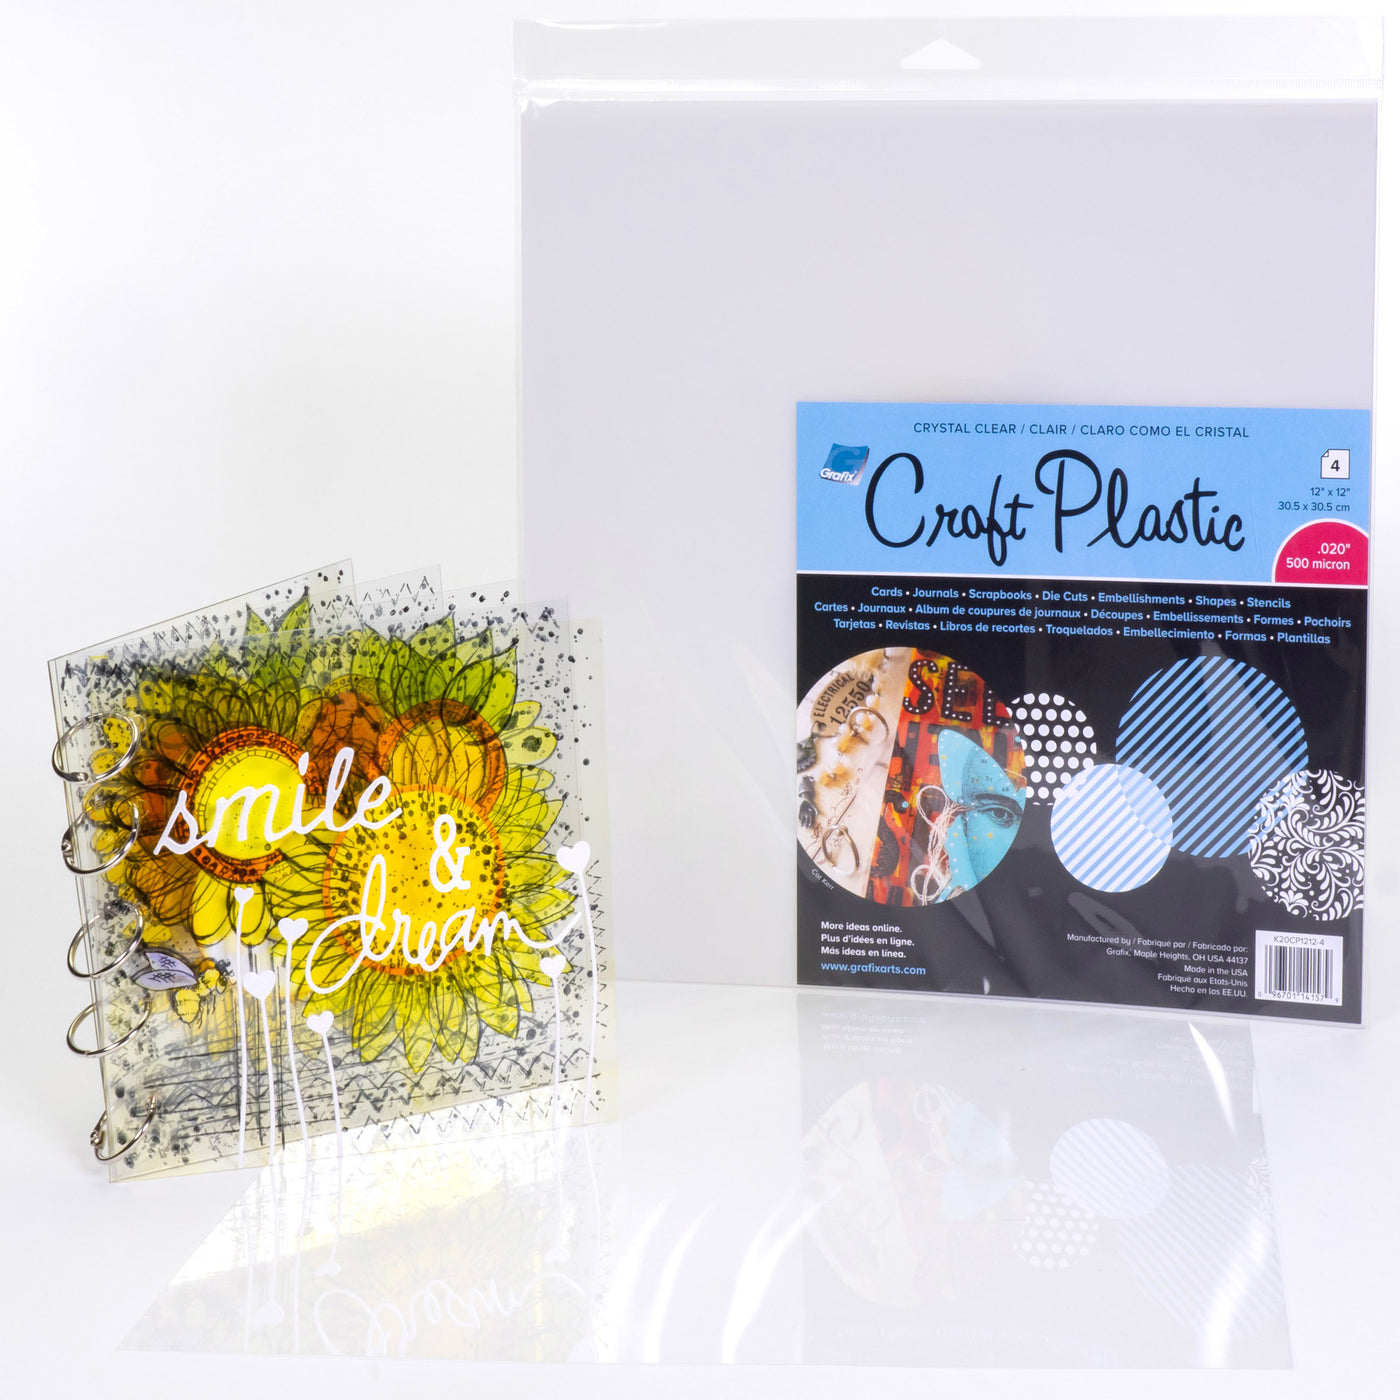 Craft Plastic is crystal clear and versatile for a myriad of crafting projects